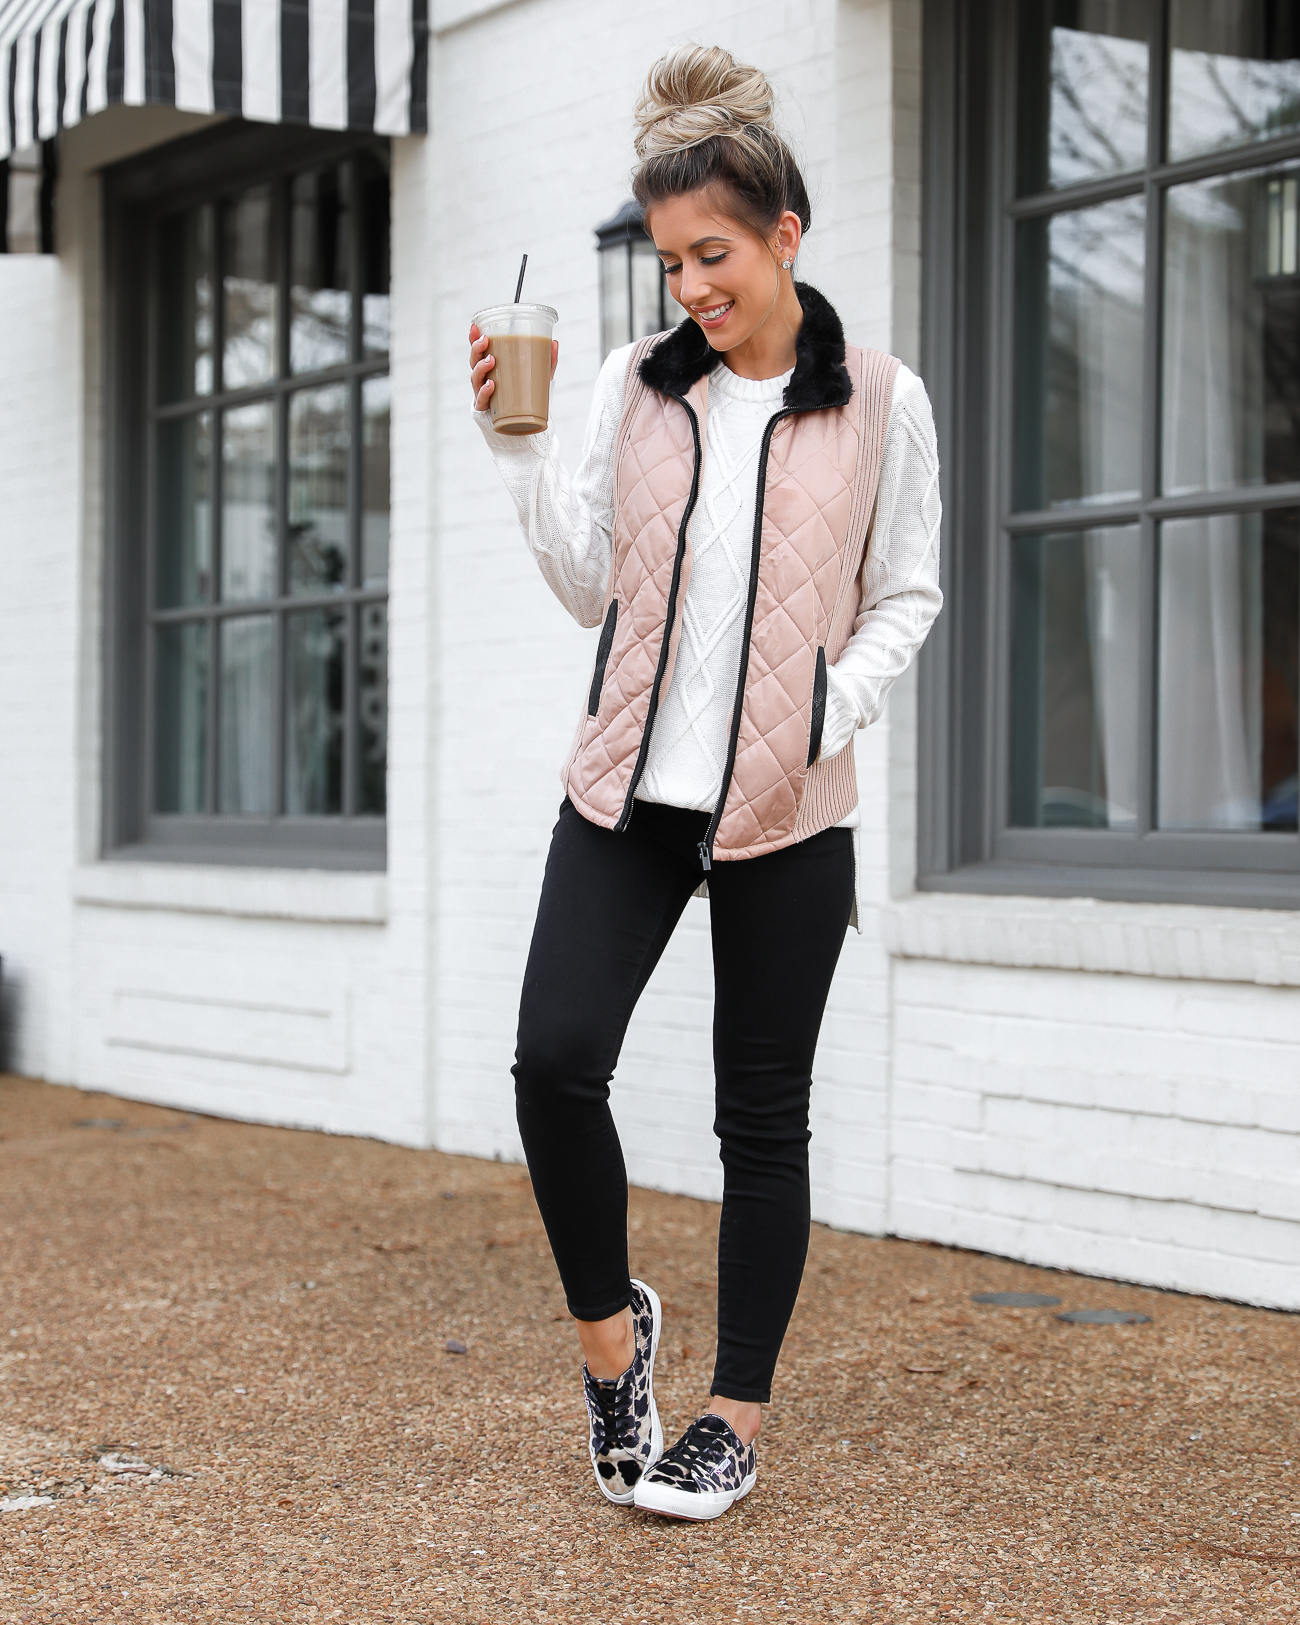 Walmart Tan and Black Quilted Vest Superga leopard velvet sneakers Black skinny jeans White knit tunic sweater Lord & Taylor Laura Beverlin